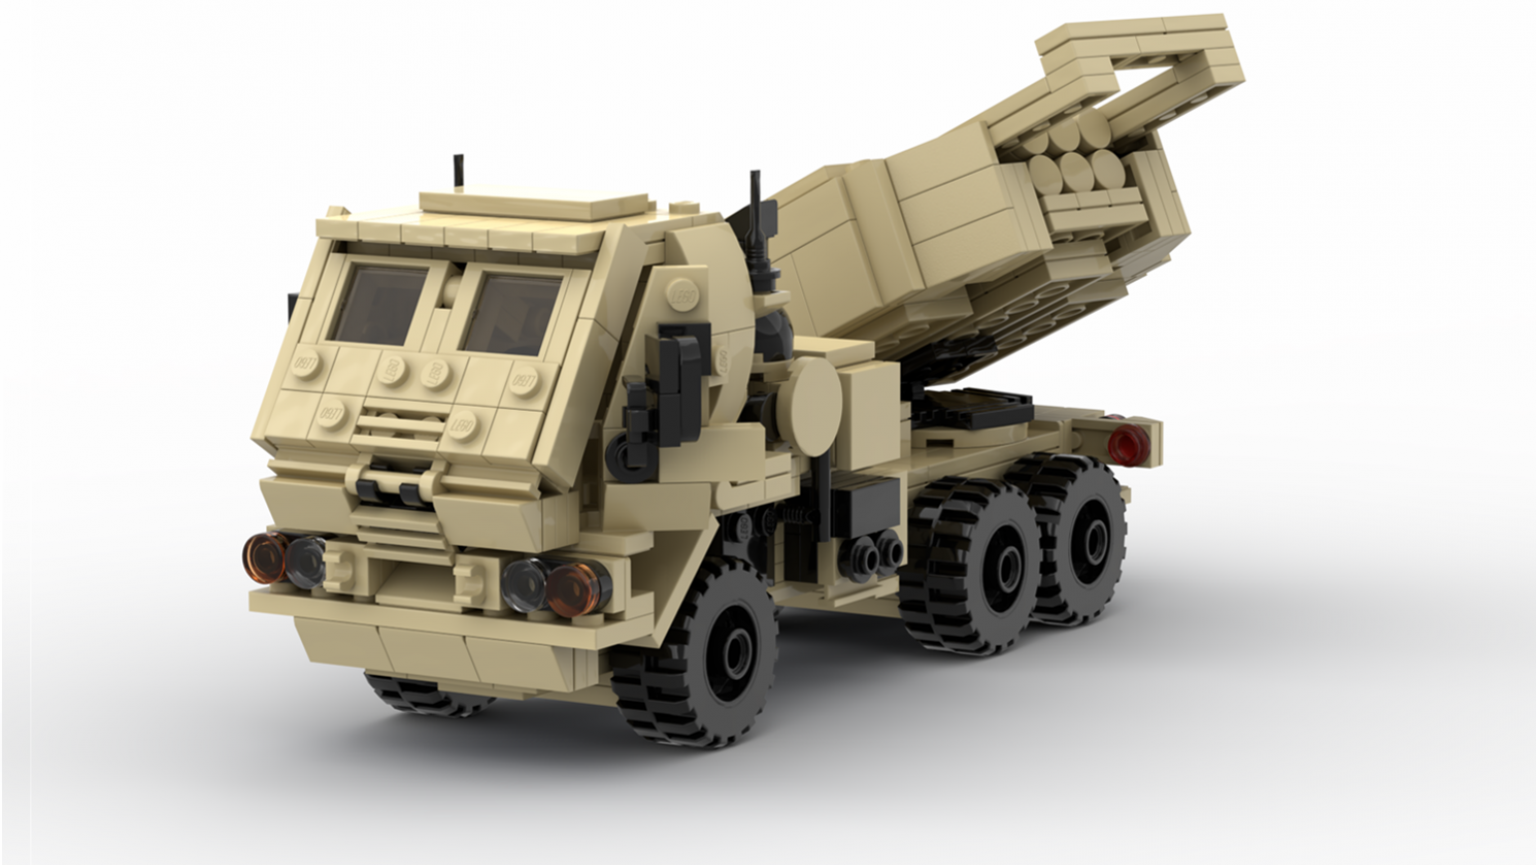 The Russian Army will destroy the HIMARS mock-up as a real multiple rocket launcher